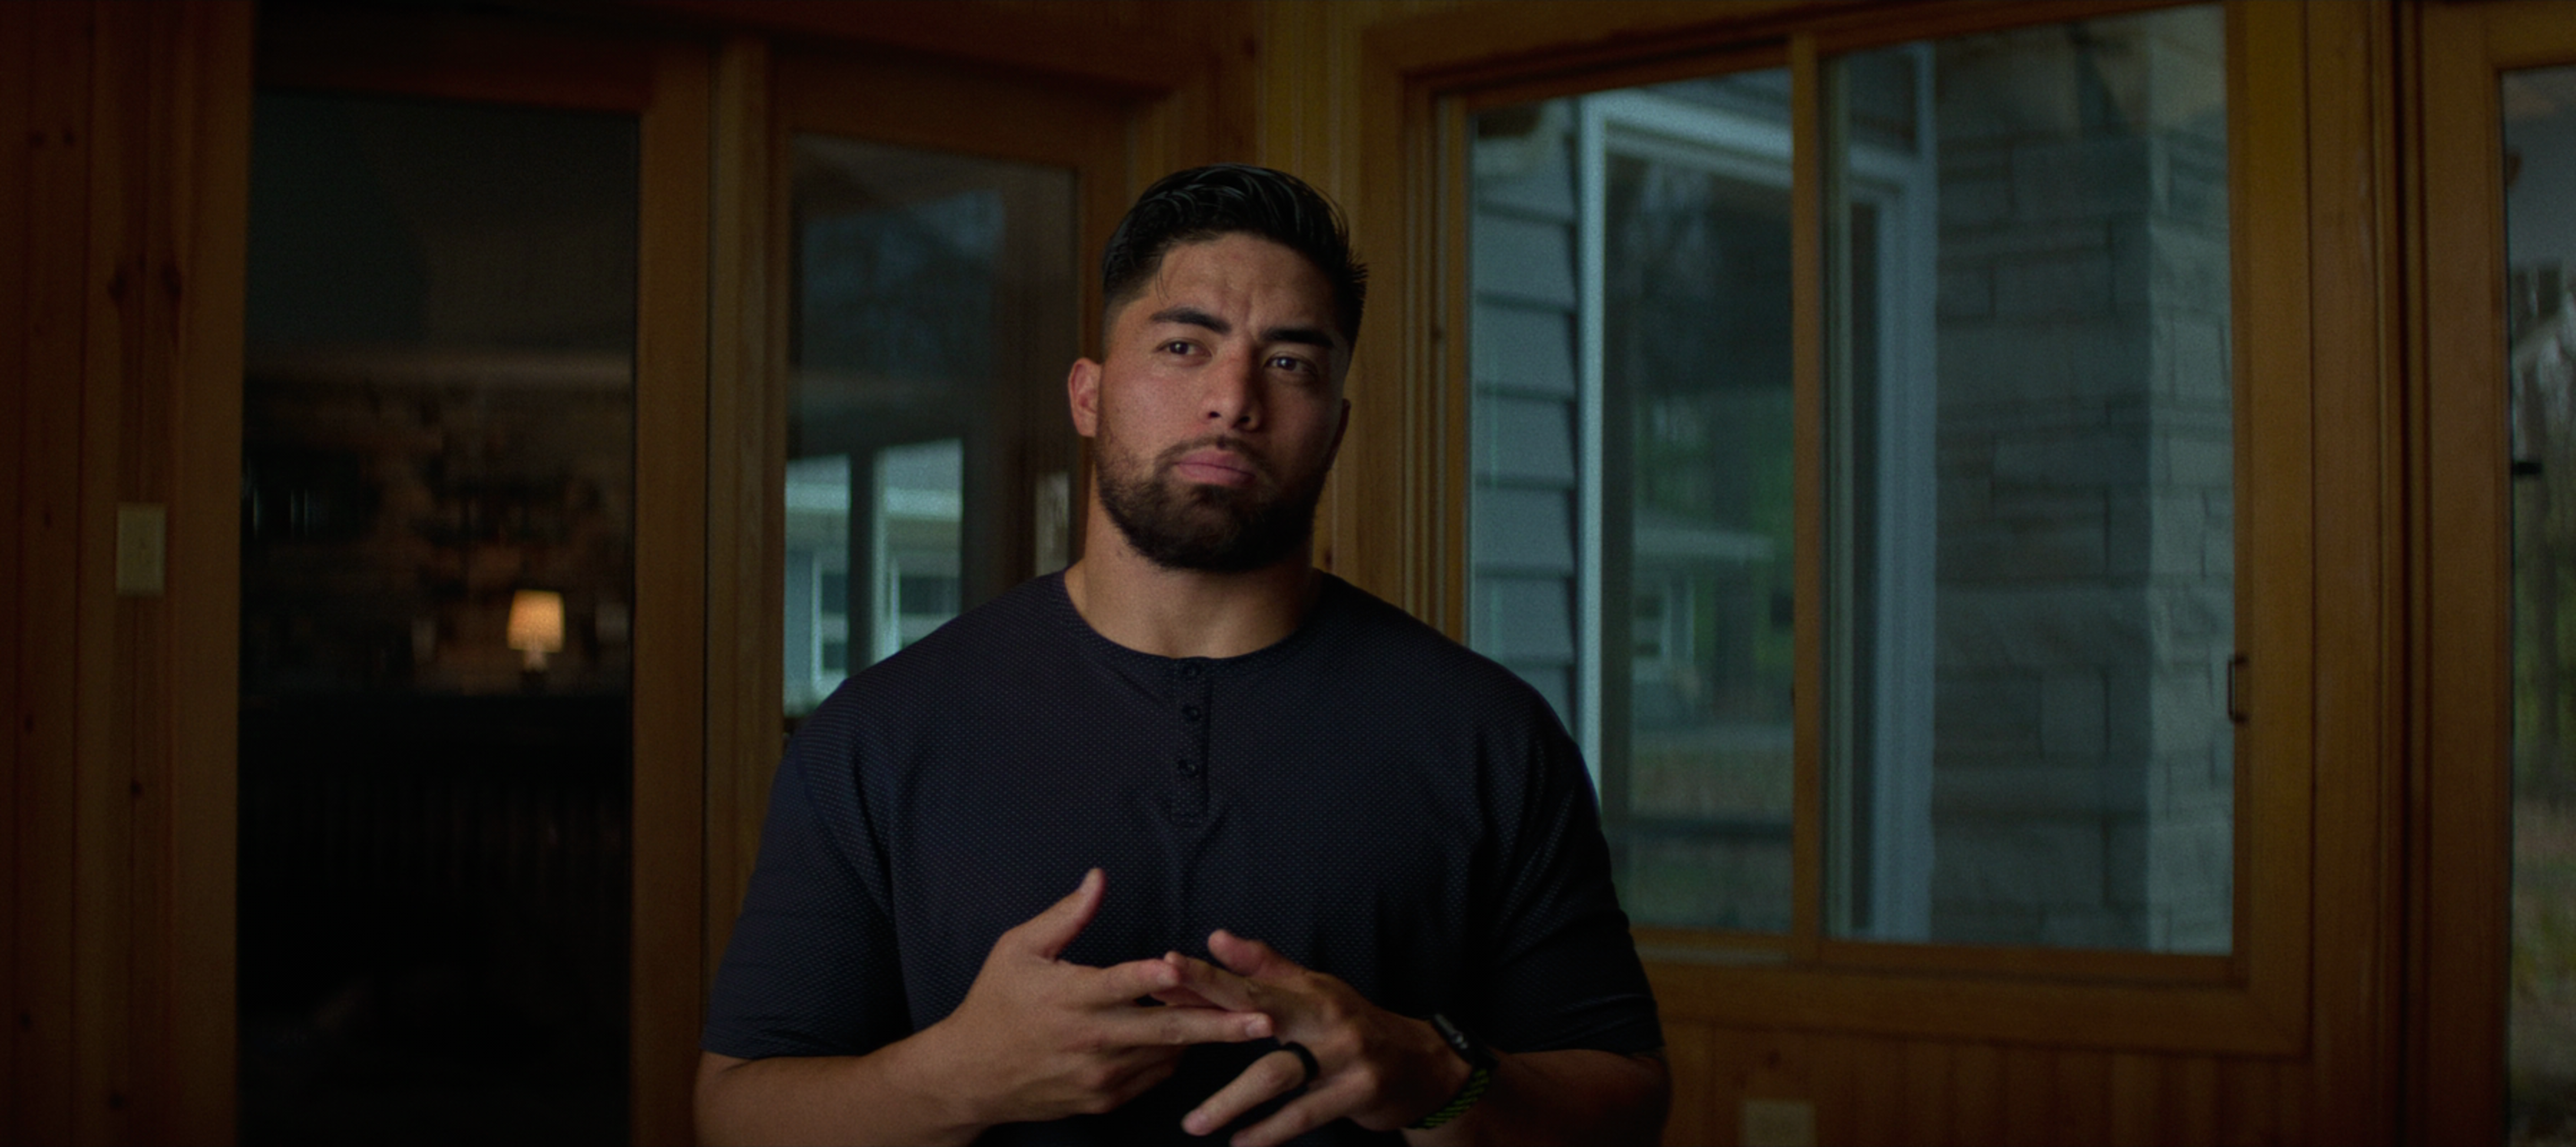 Former Notre Dame football player Manti Te'o says after participating in Netflix's "Untold: The Girlfriend Who Didn't Exist" documentary he's "healed from it all."